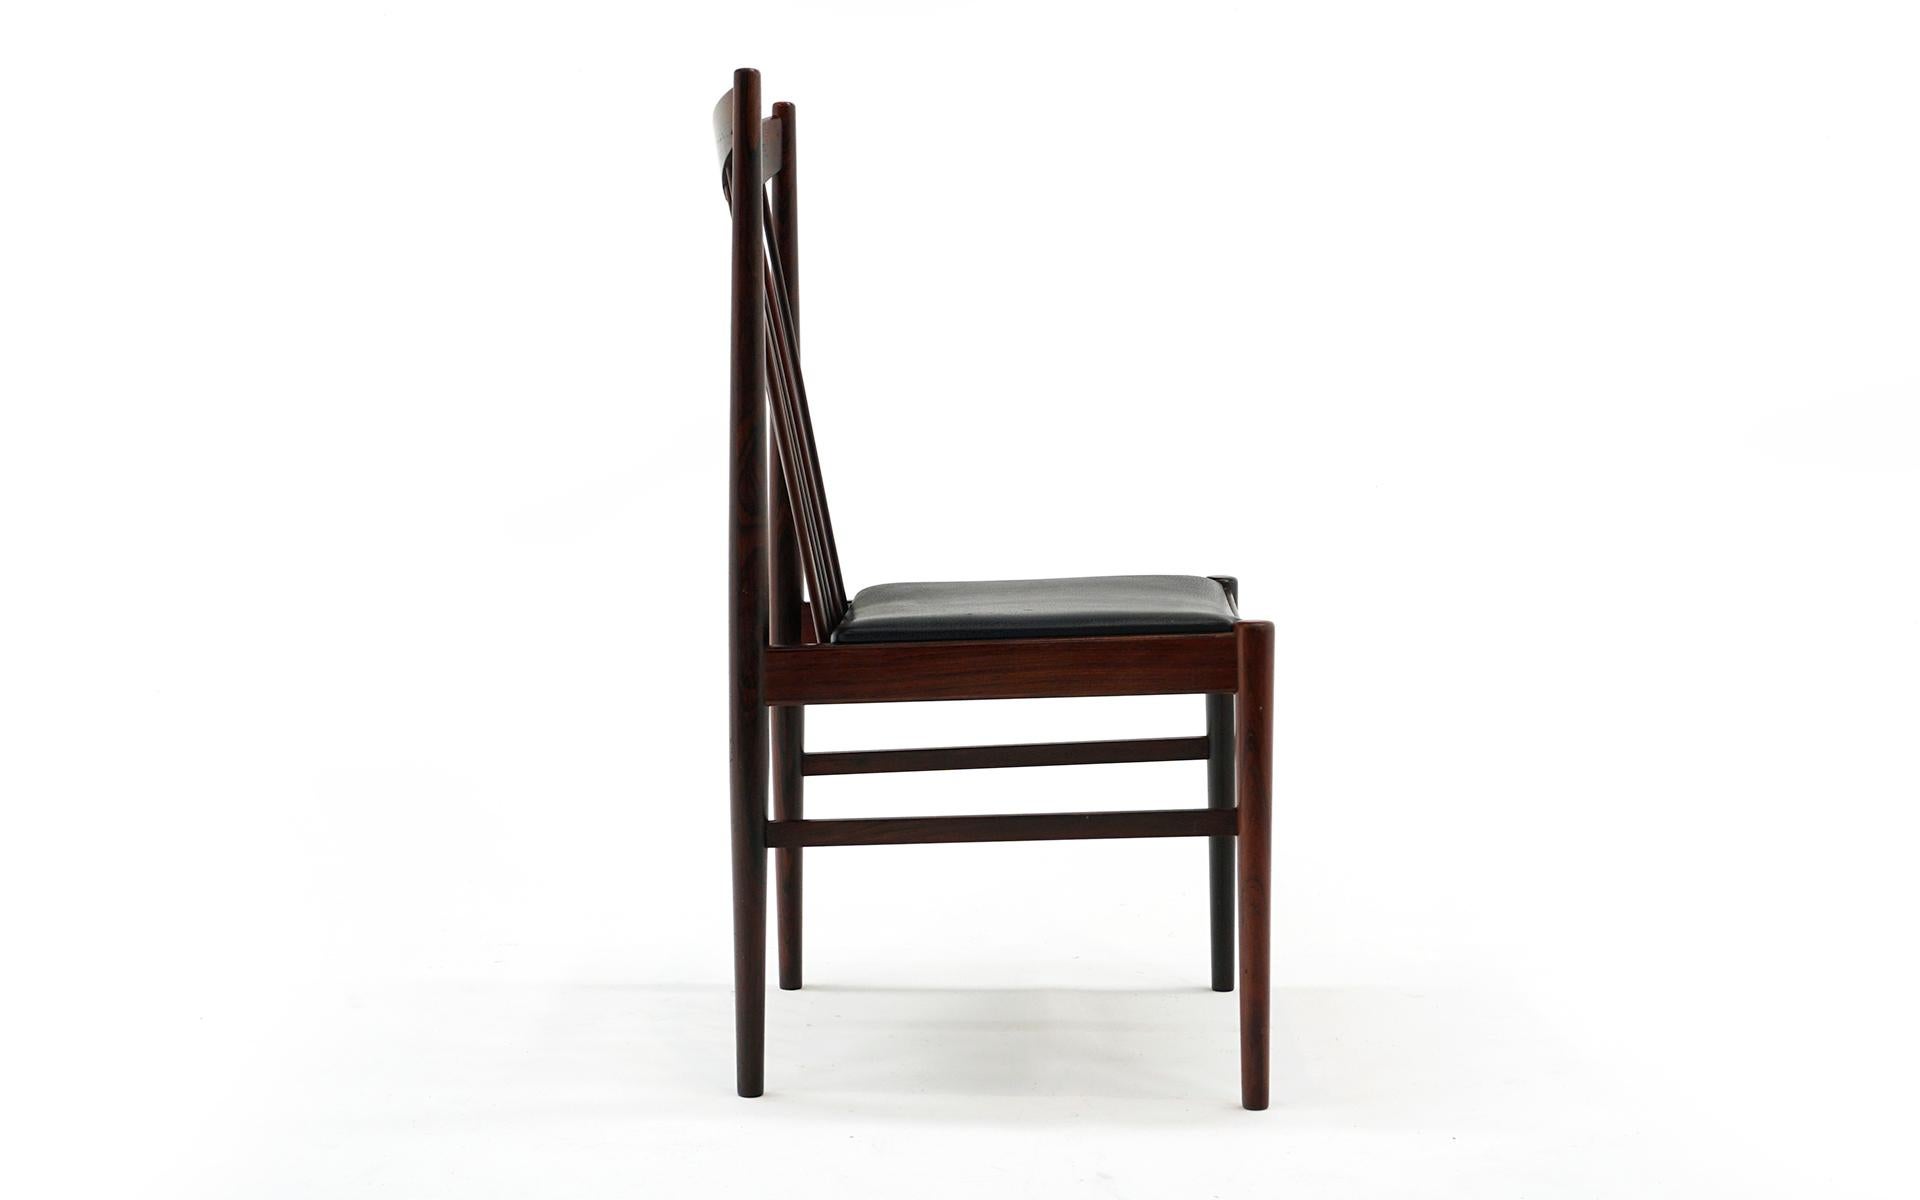 Danish One Brazilian Rosewood Dining Chair Model 422 by Arne Vodder for Sibast, Signed. For Sale